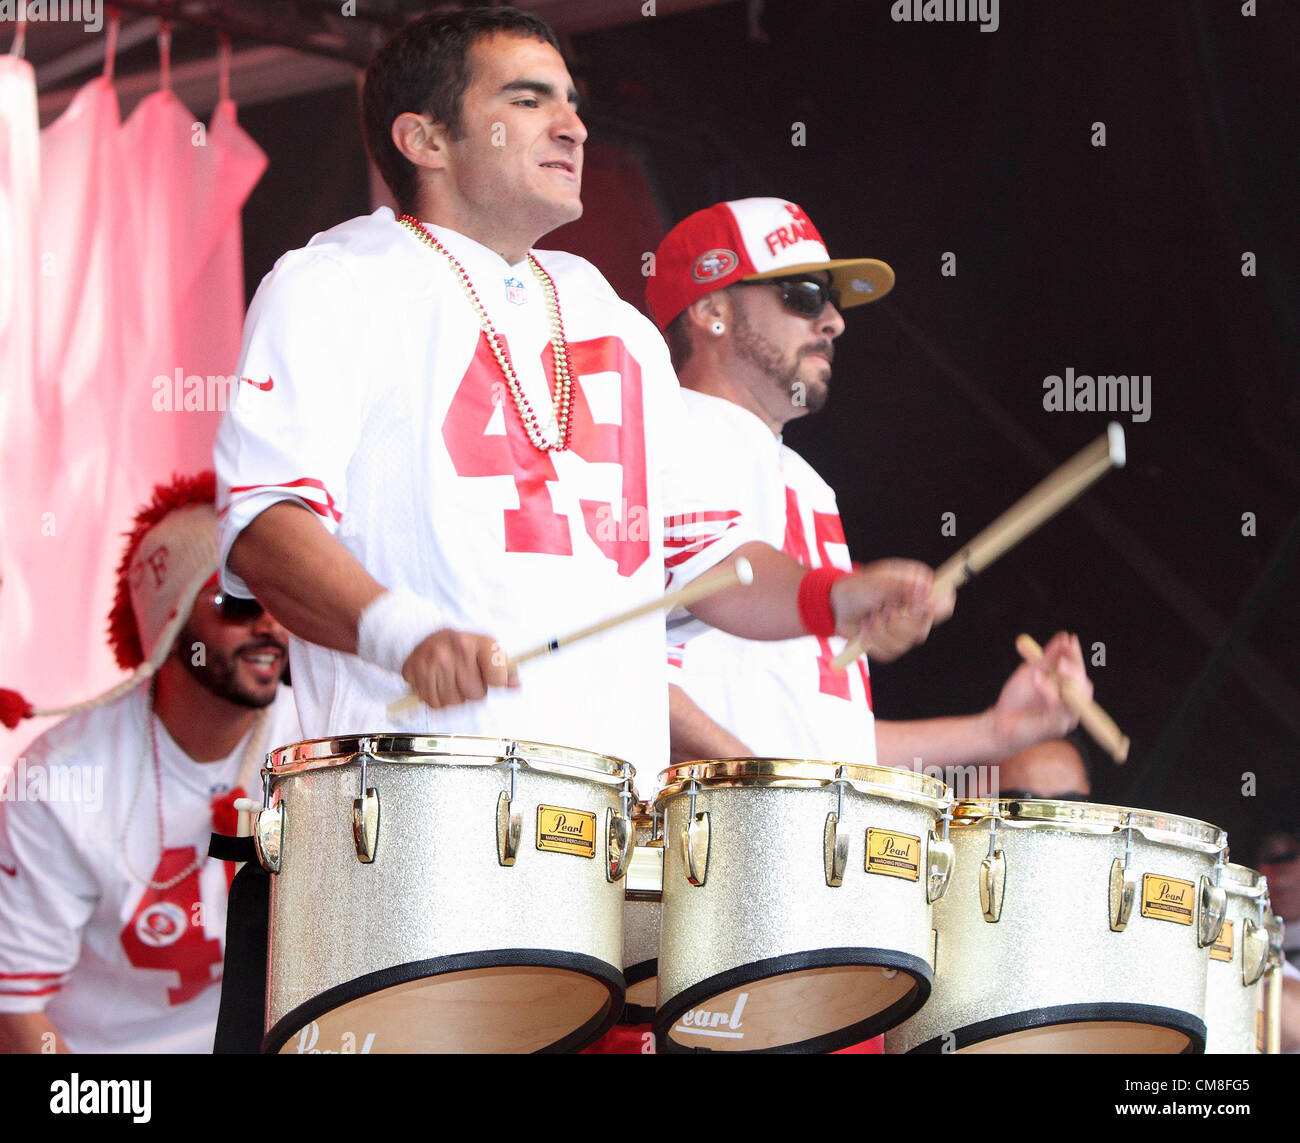 San Francisco 49ers Drumline The NFL Fan Rally in Trafalgar Square hosted by Sky Sports NFL presenters before the game on Sunday between St. Louis Rams and the New England Patriots at Wembley Stadium. October 27th 2012   Photo by Keith Mayhew Stock Photo